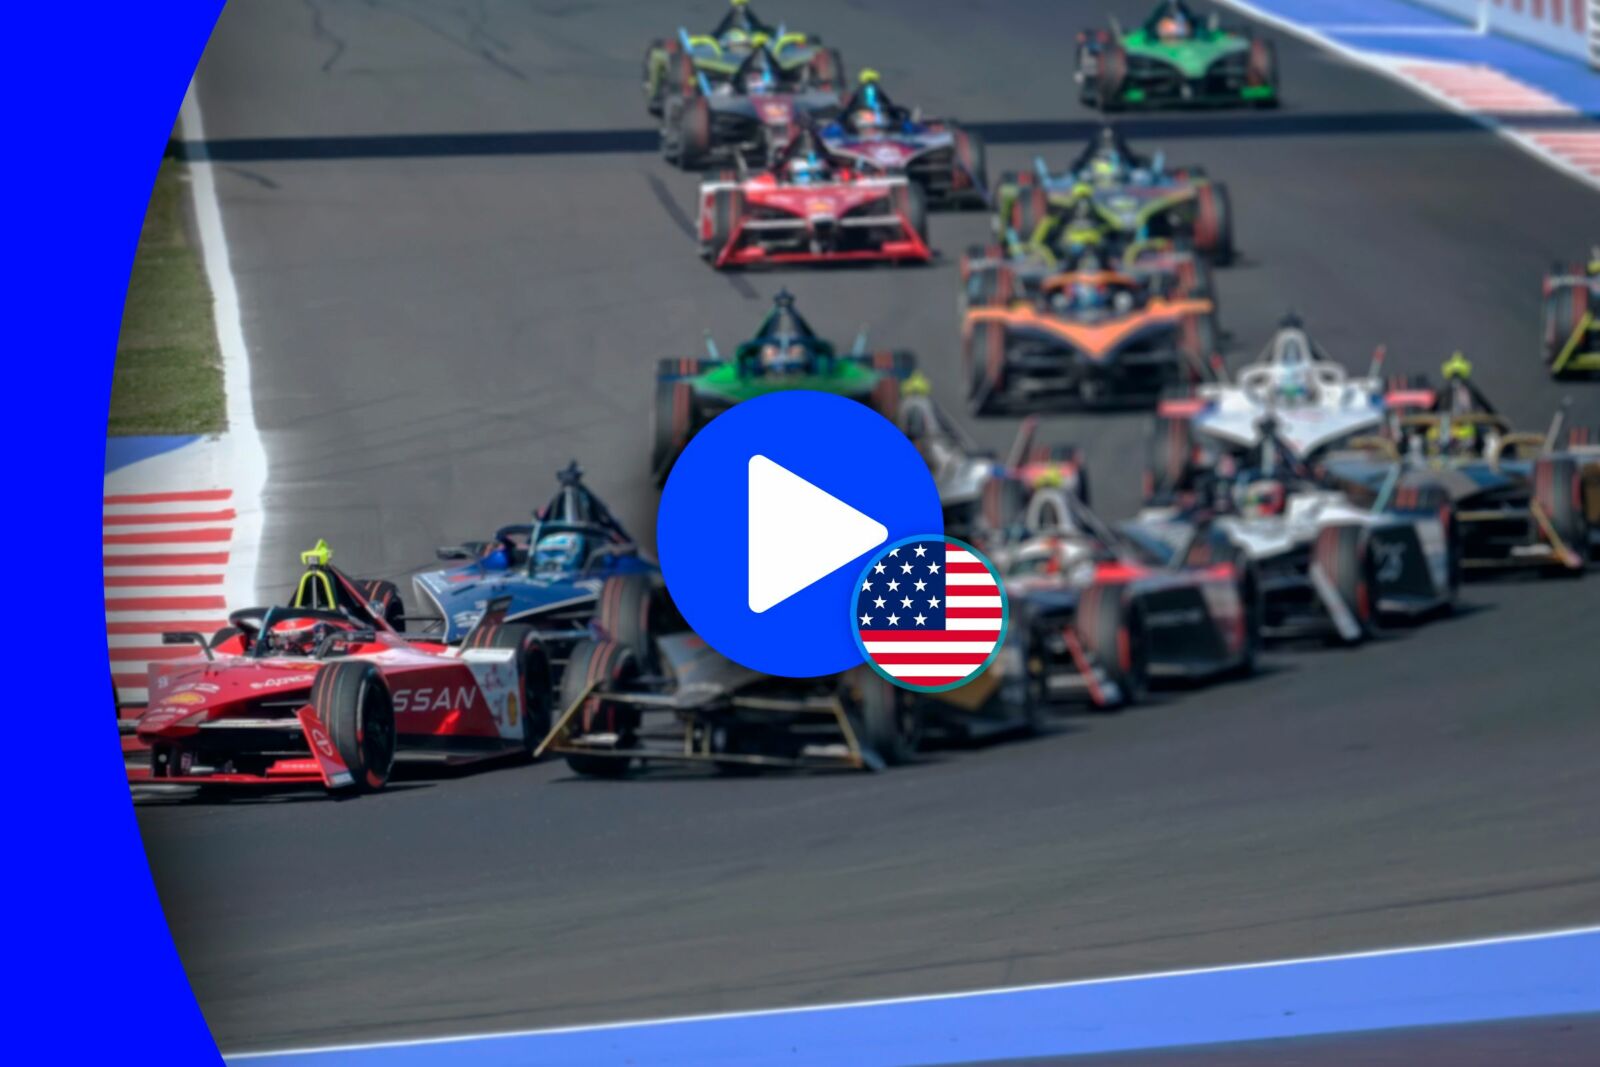 Formula 1 cars in the Formula E race with a play icon and the USA flag